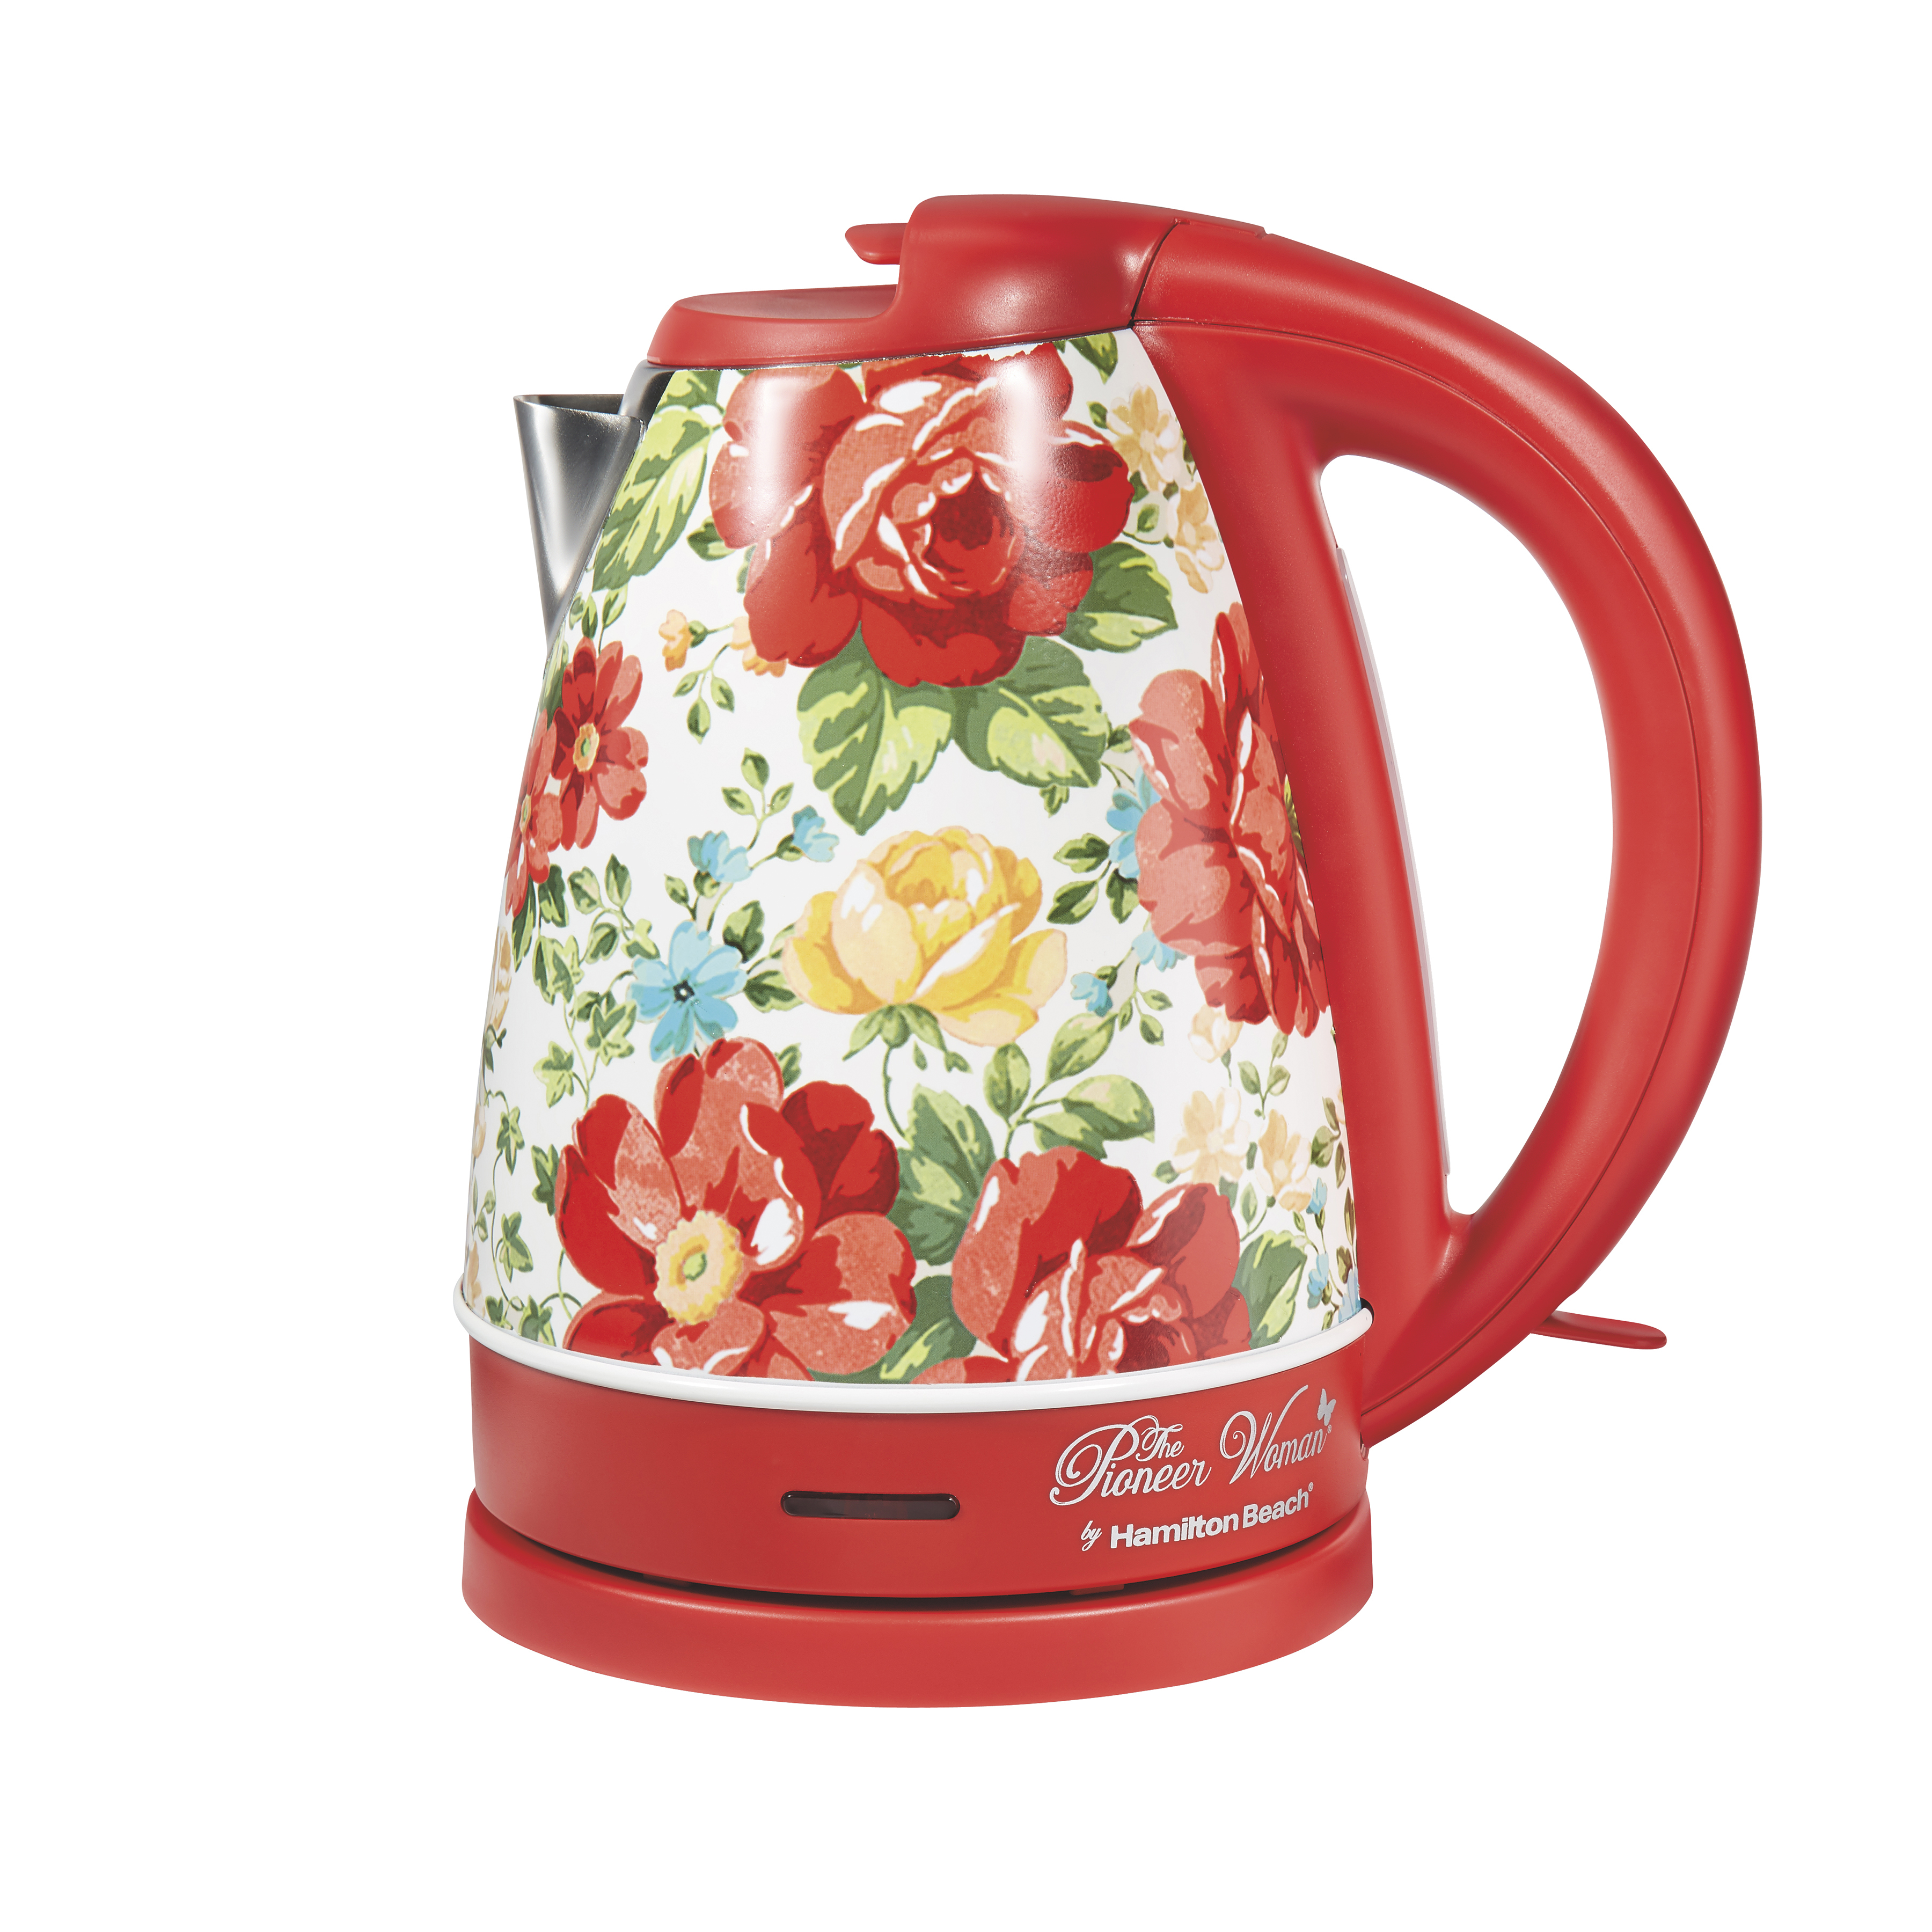 The Pioneer Woman 1.7 Liter Electric Kettle, Vintage Floral Red, 40970 - image 1 of 7